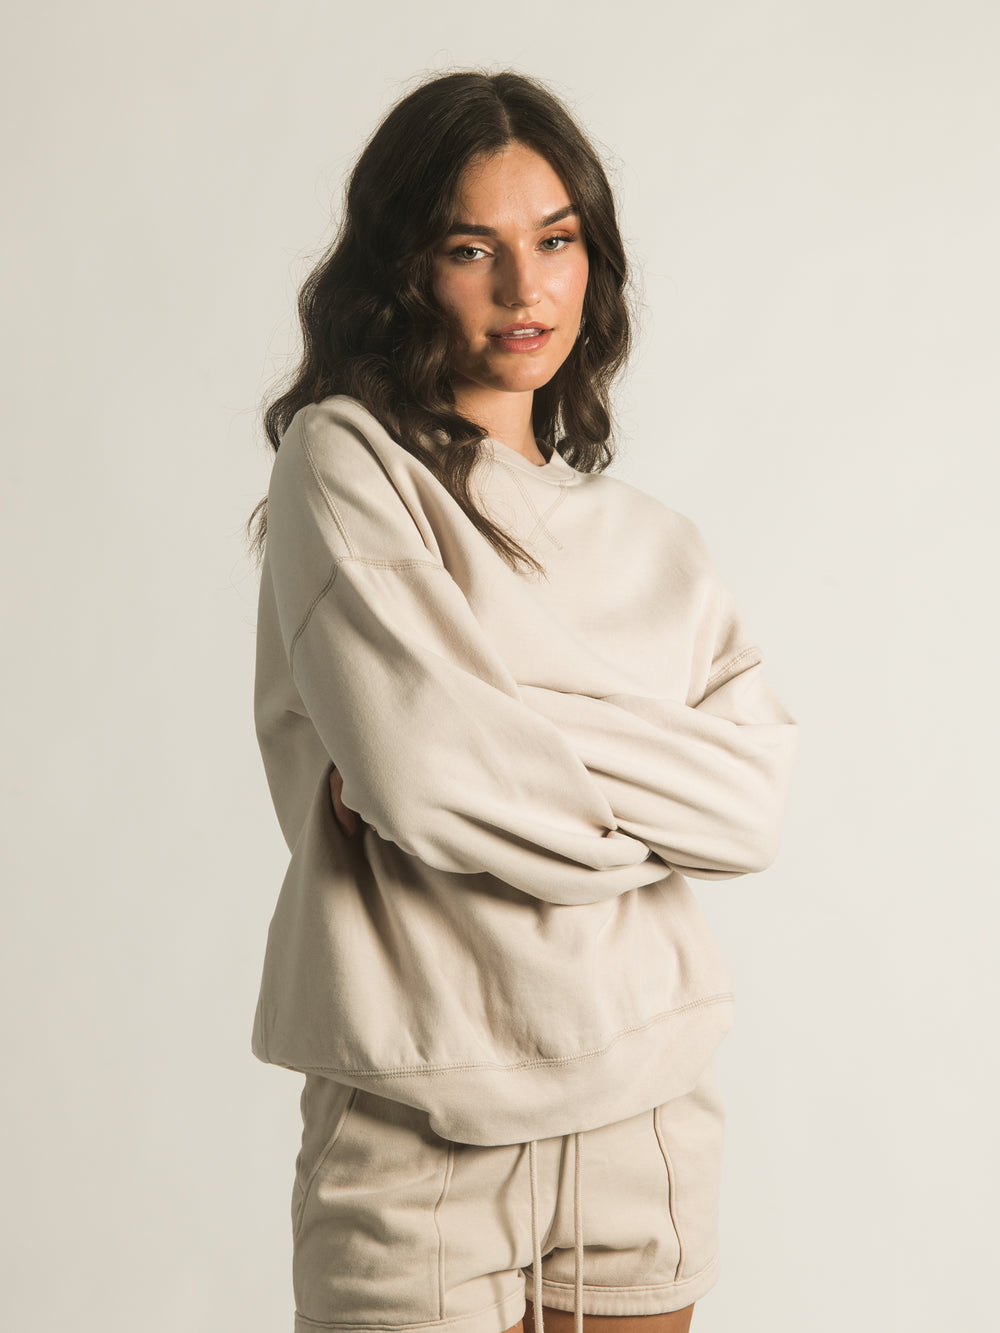 HARLOW MICHELLE CREWNECK - CLEARANCE